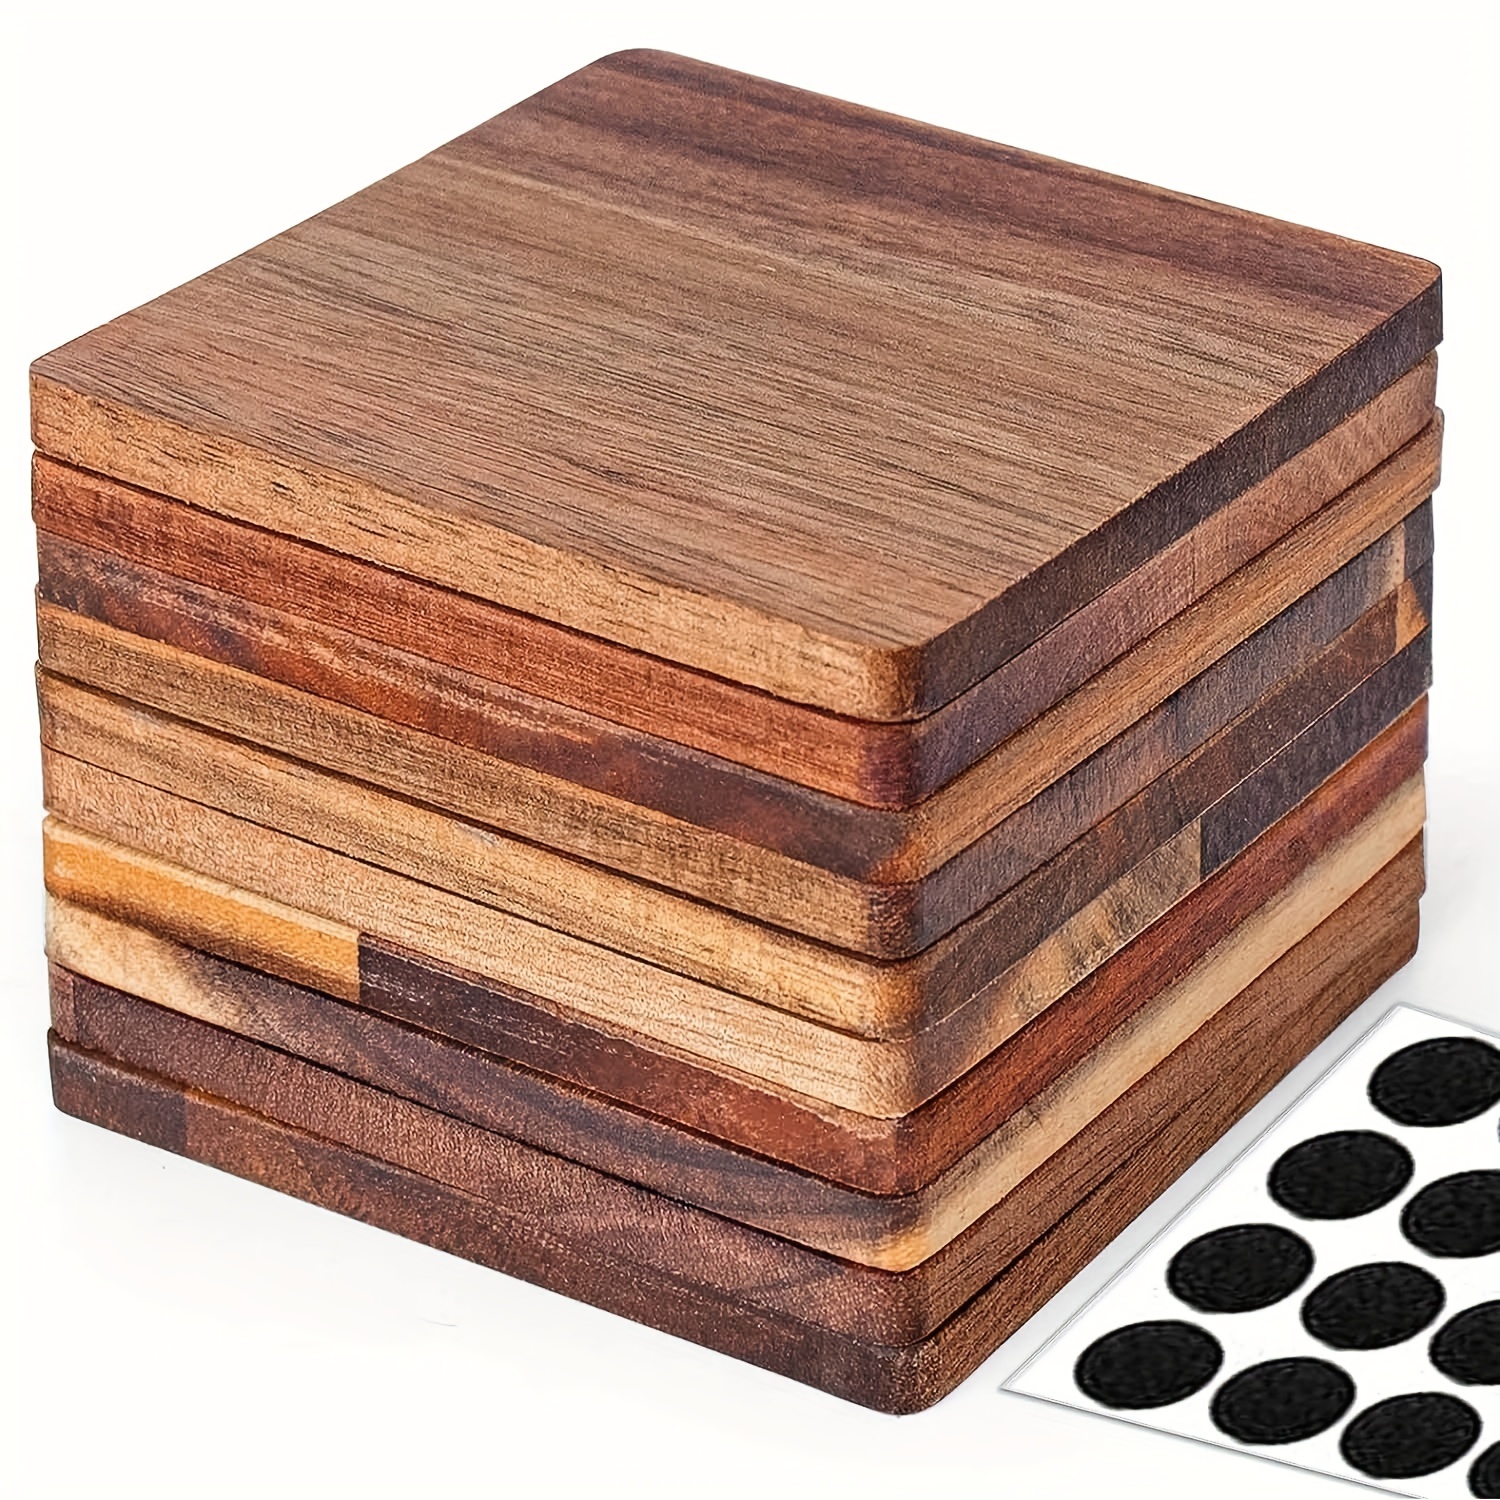 8 Pack Acacia Wood Coasters for Coffee Table, Wooden Coasters for Drinks (4  In)